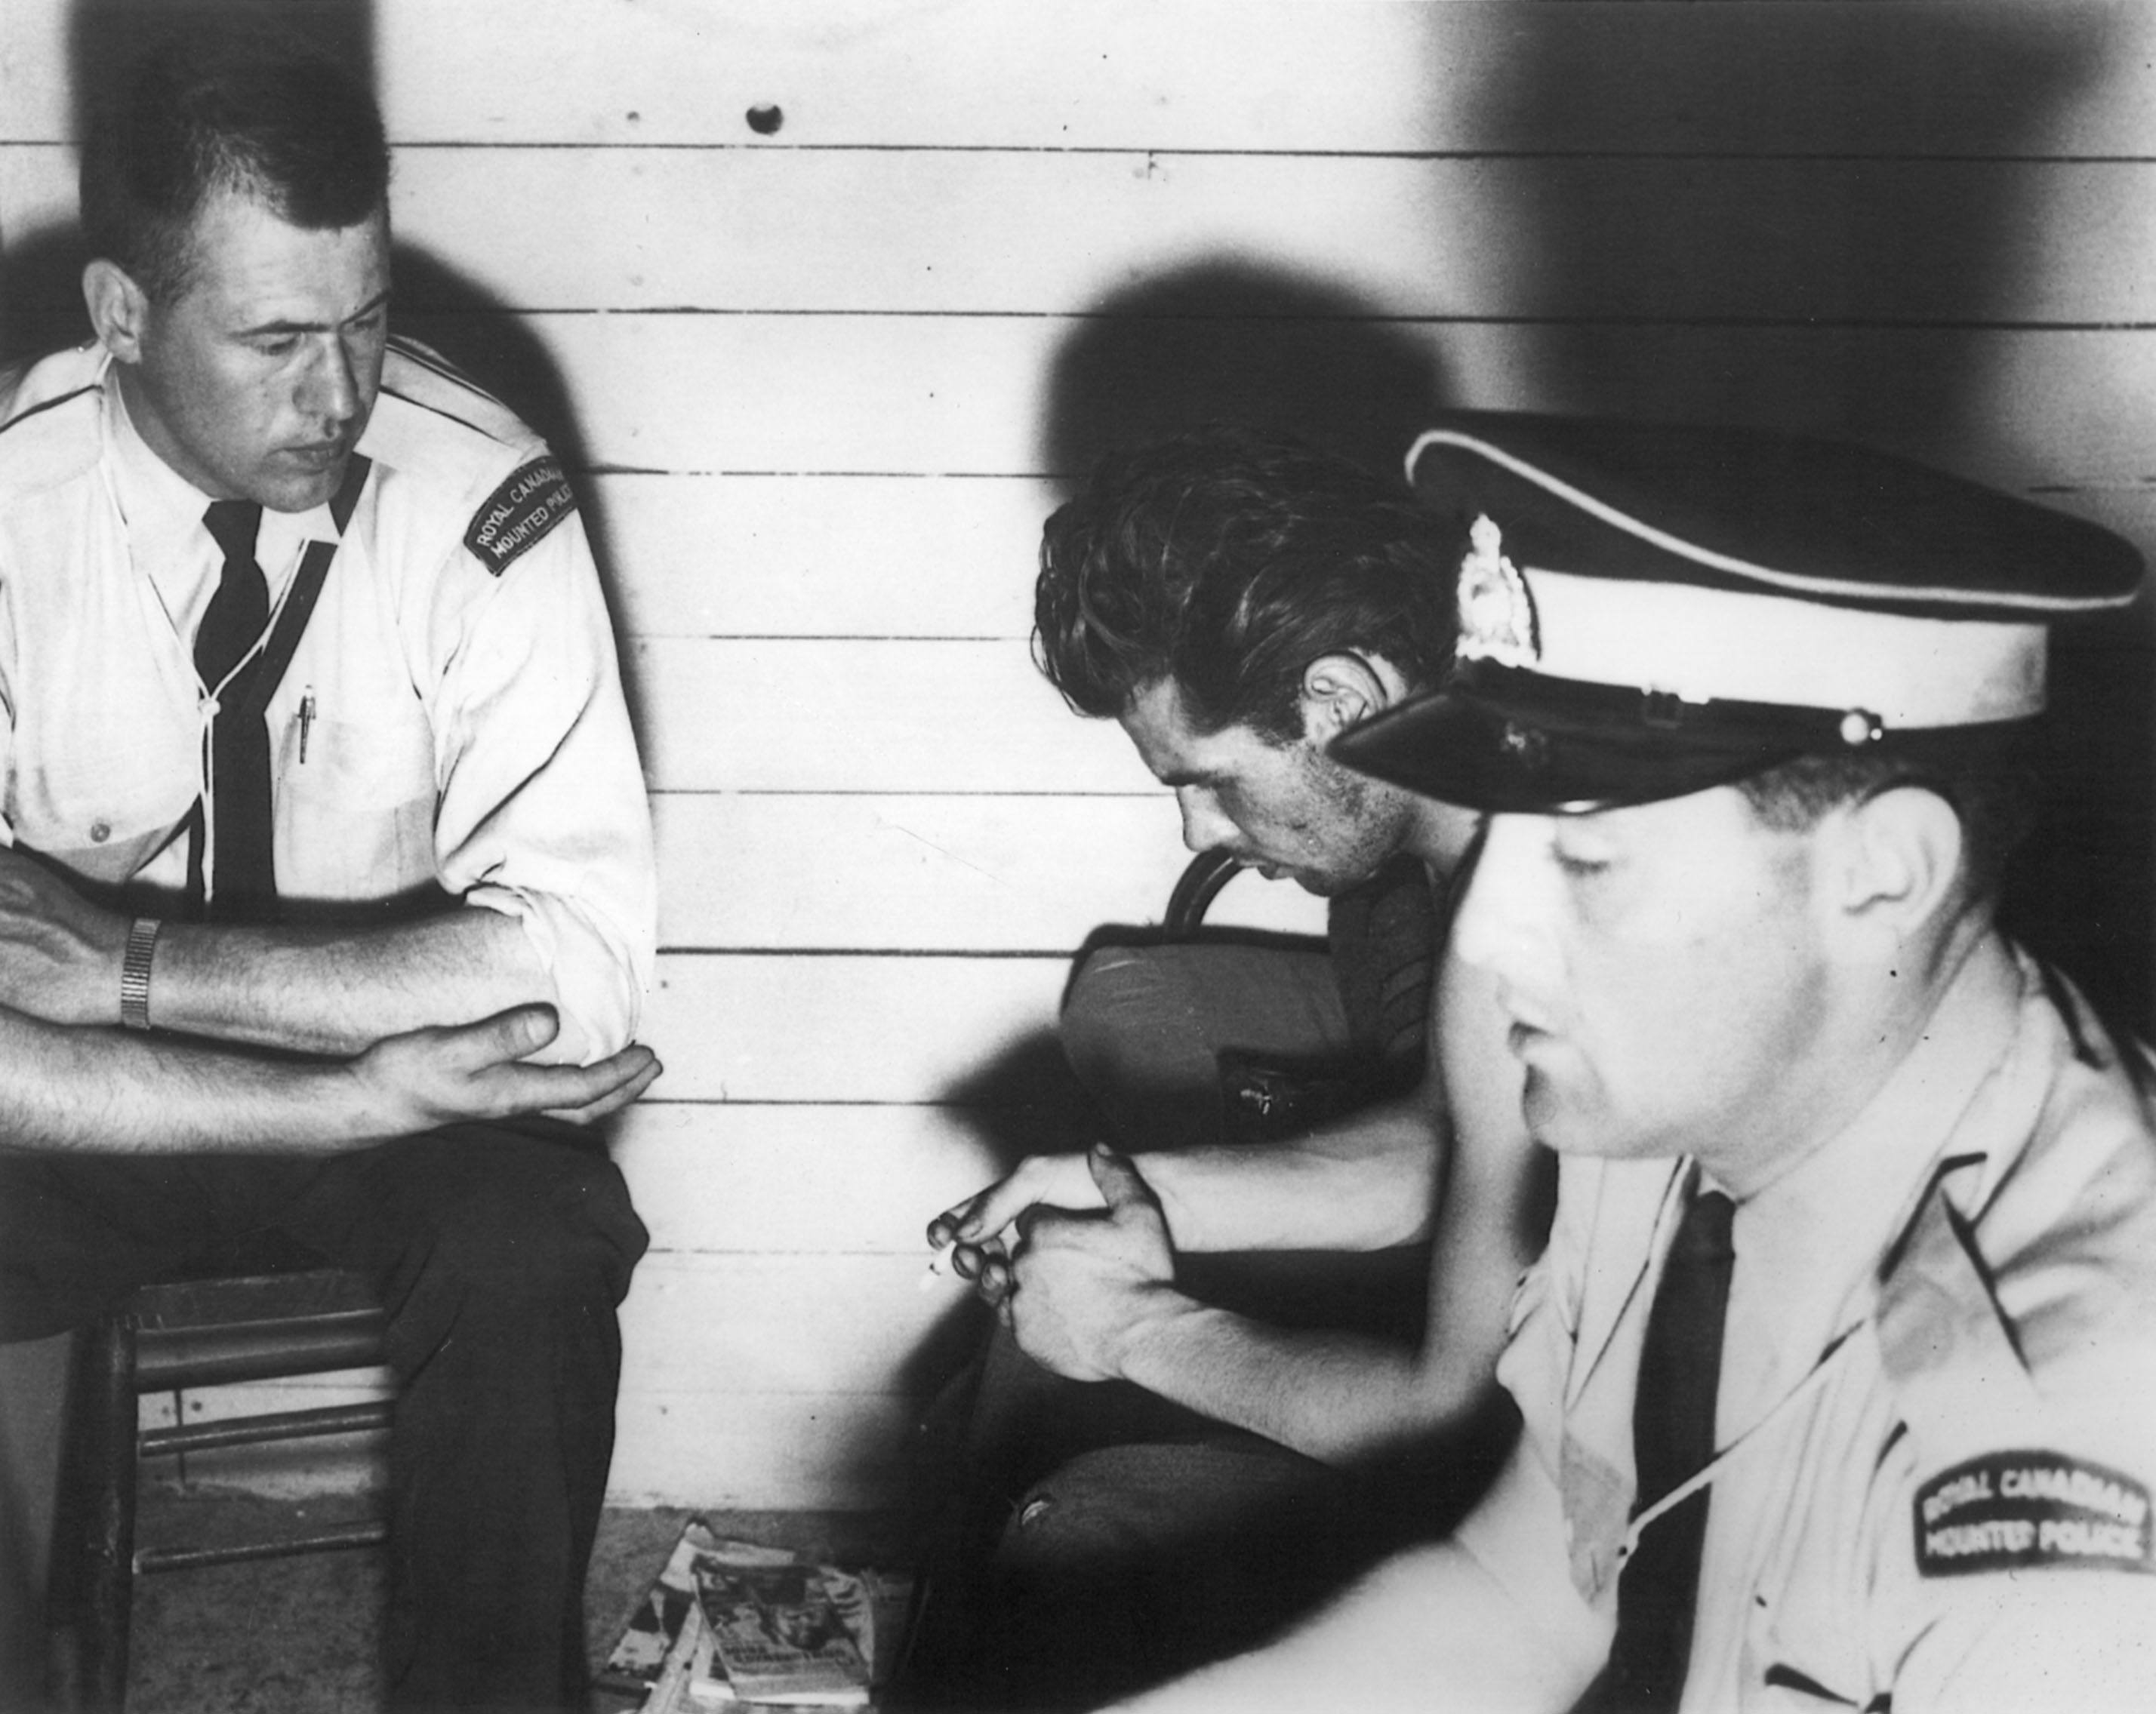 WAITING-Robert Raymond Cook waits with police at the RCMP Bashaw detachment cell block in June of 1959. After being accused of killing his family in Stettler